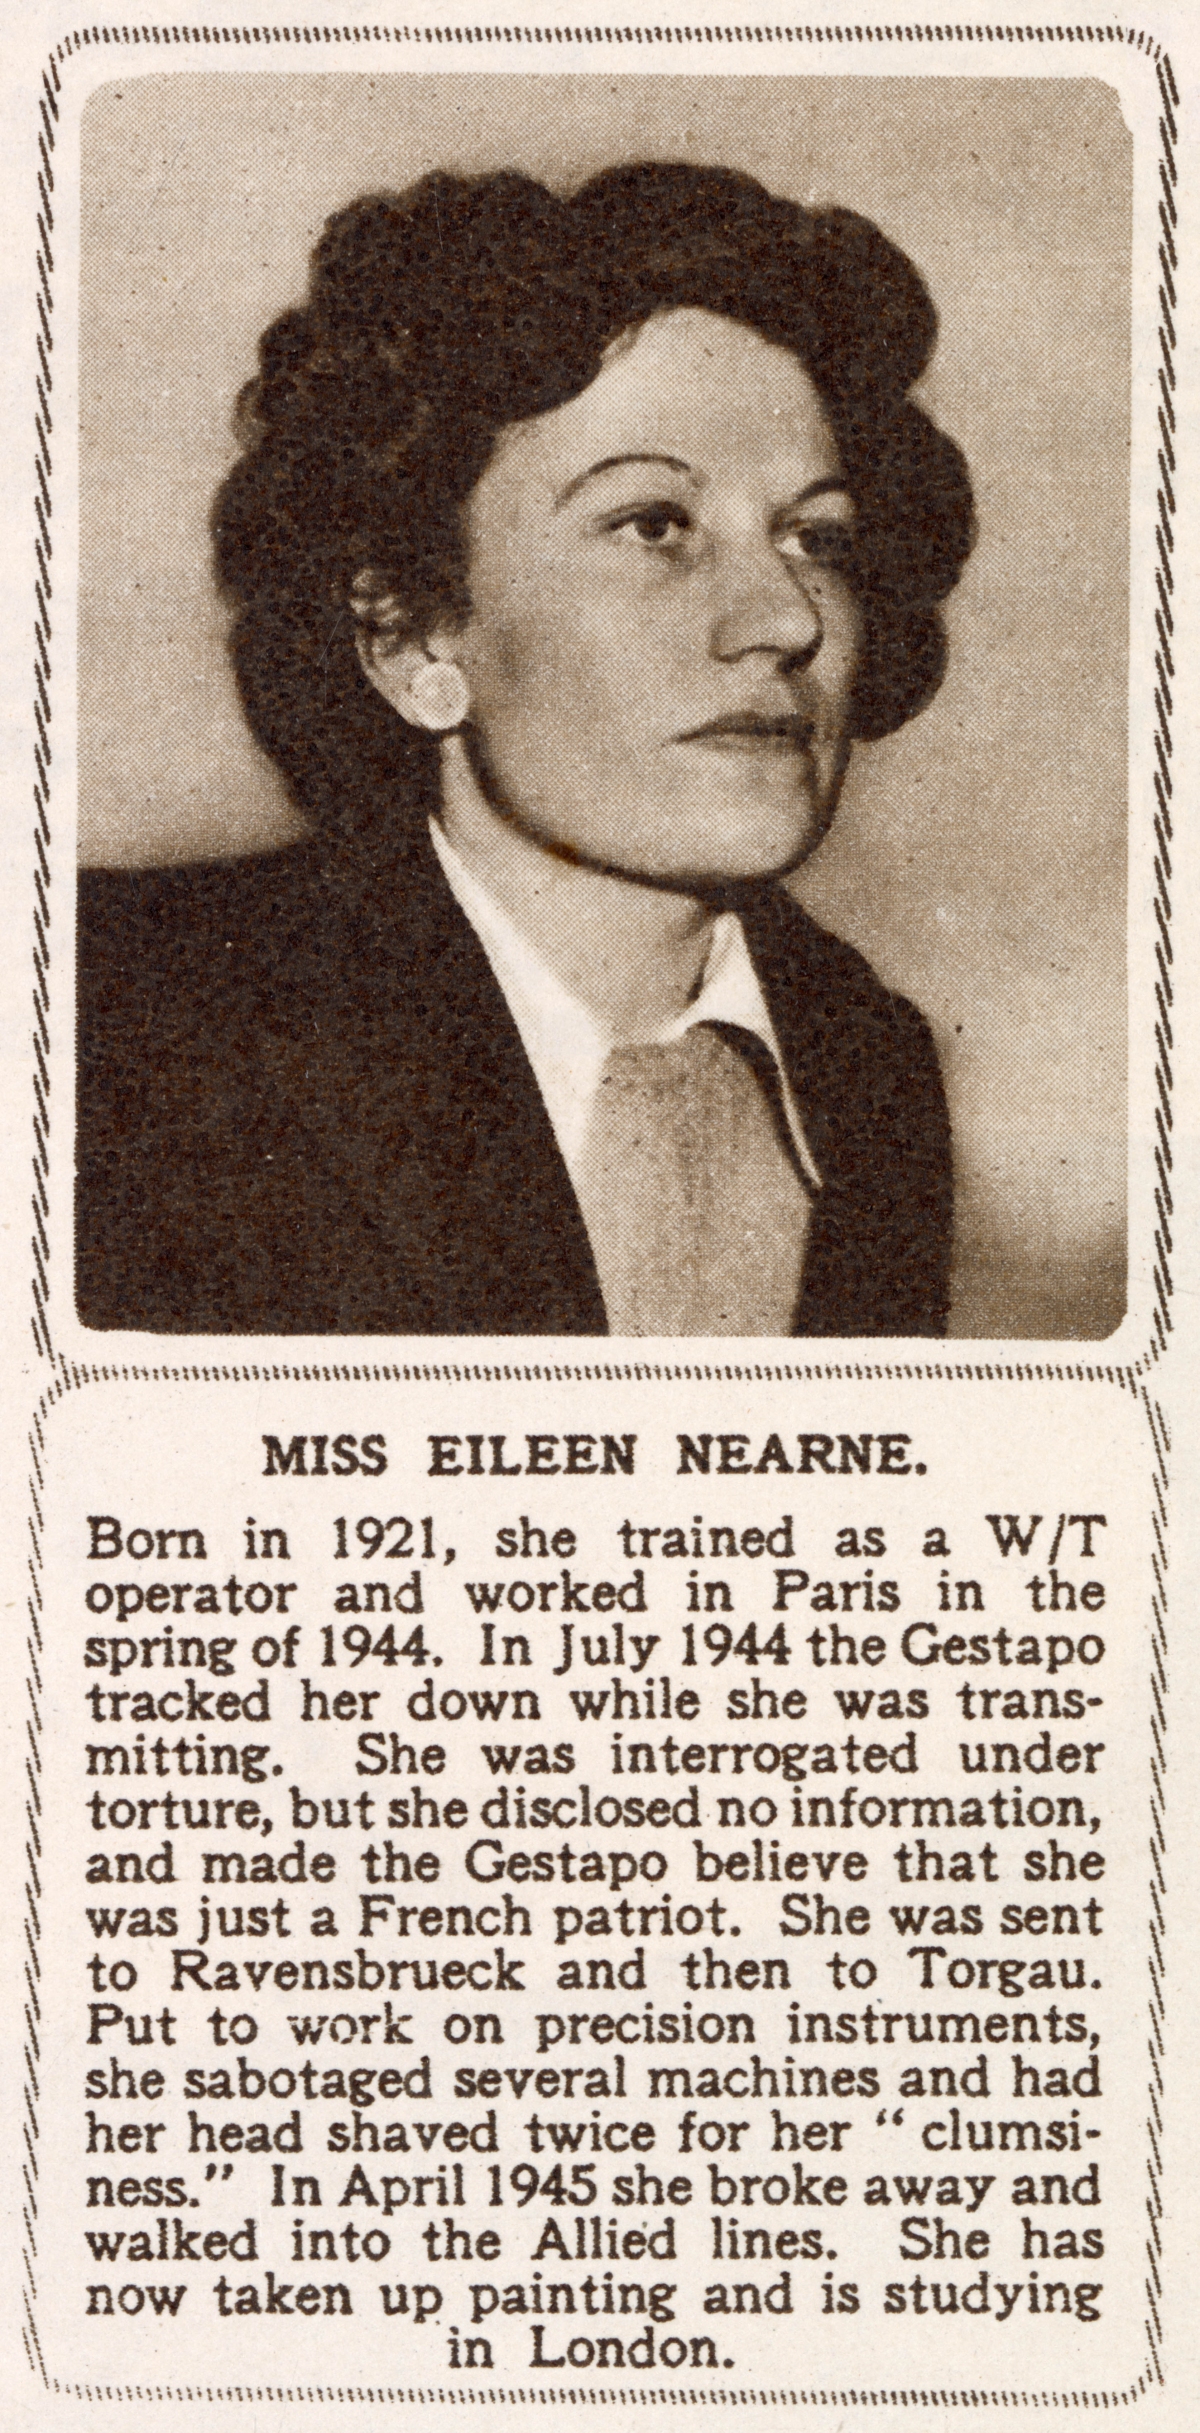 Article about Eileen Nearne and her sister after the war.  Published in the Illustrated London News on 22 May 1948.  © Illustrated London News Ltd/Mary Evans